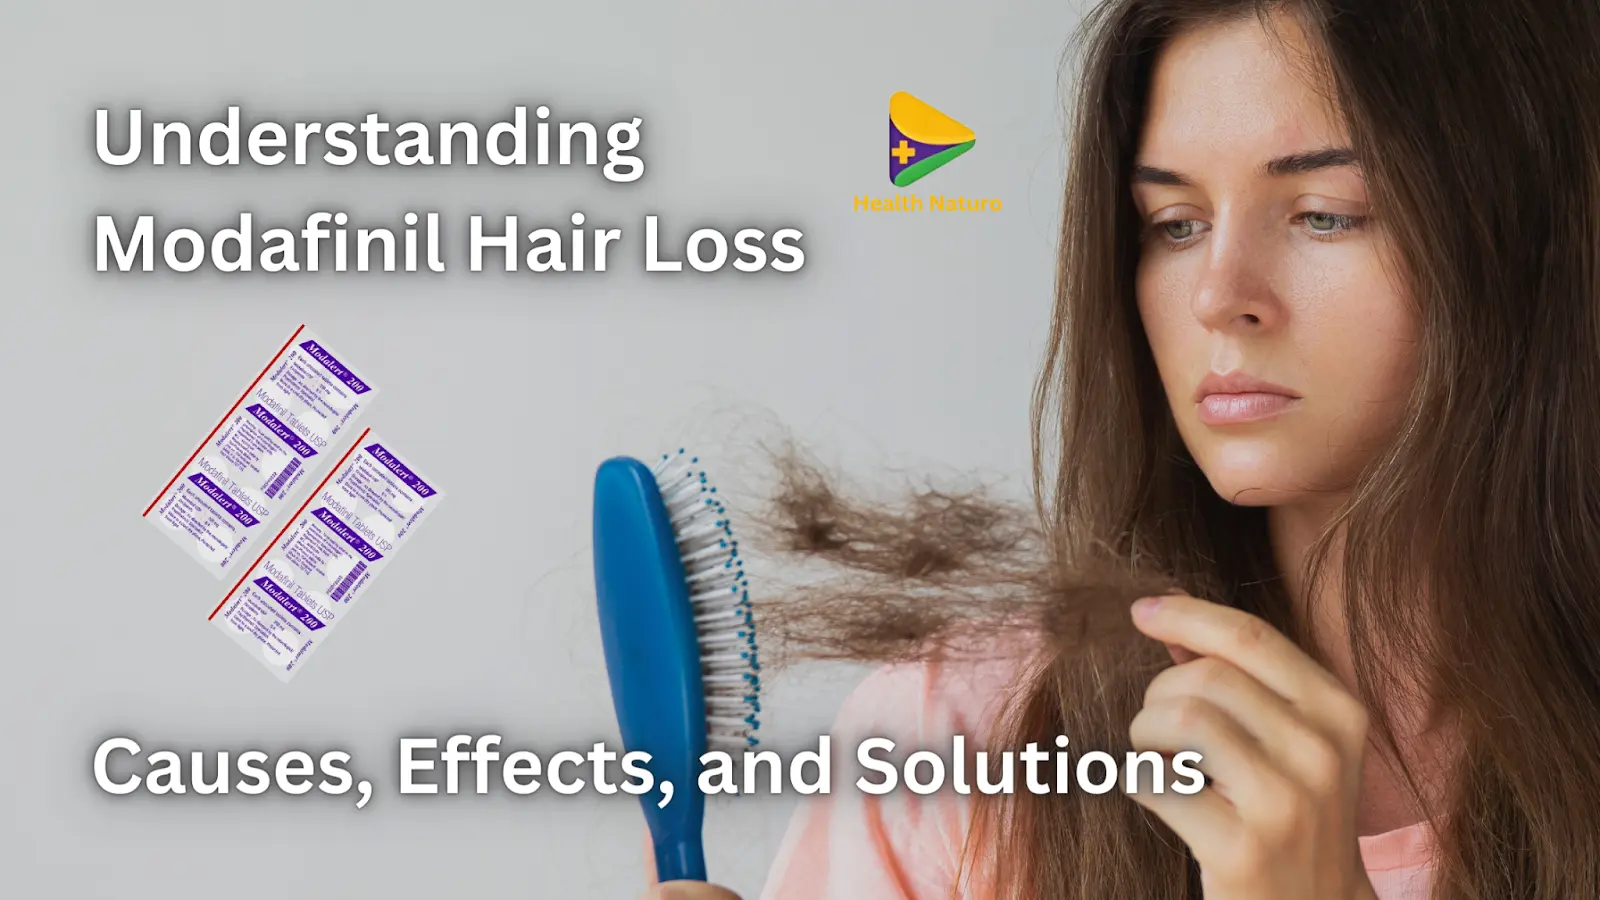 Understanding Modafinil Hair Loss: Causes, Effects, and Solutions